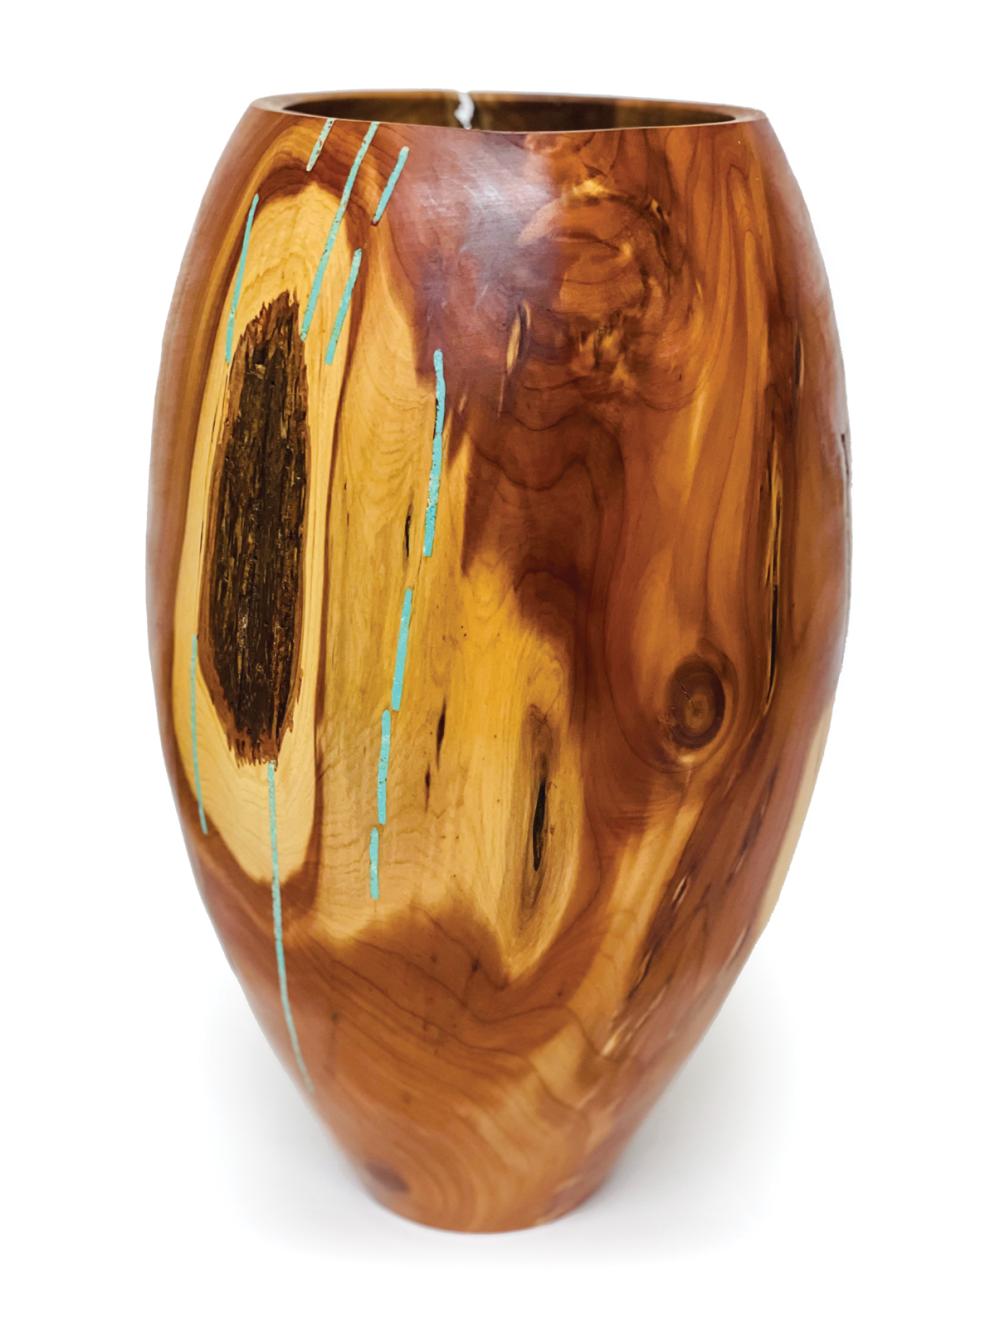 CARVED RED CEDAR VESSEL BY TERRY